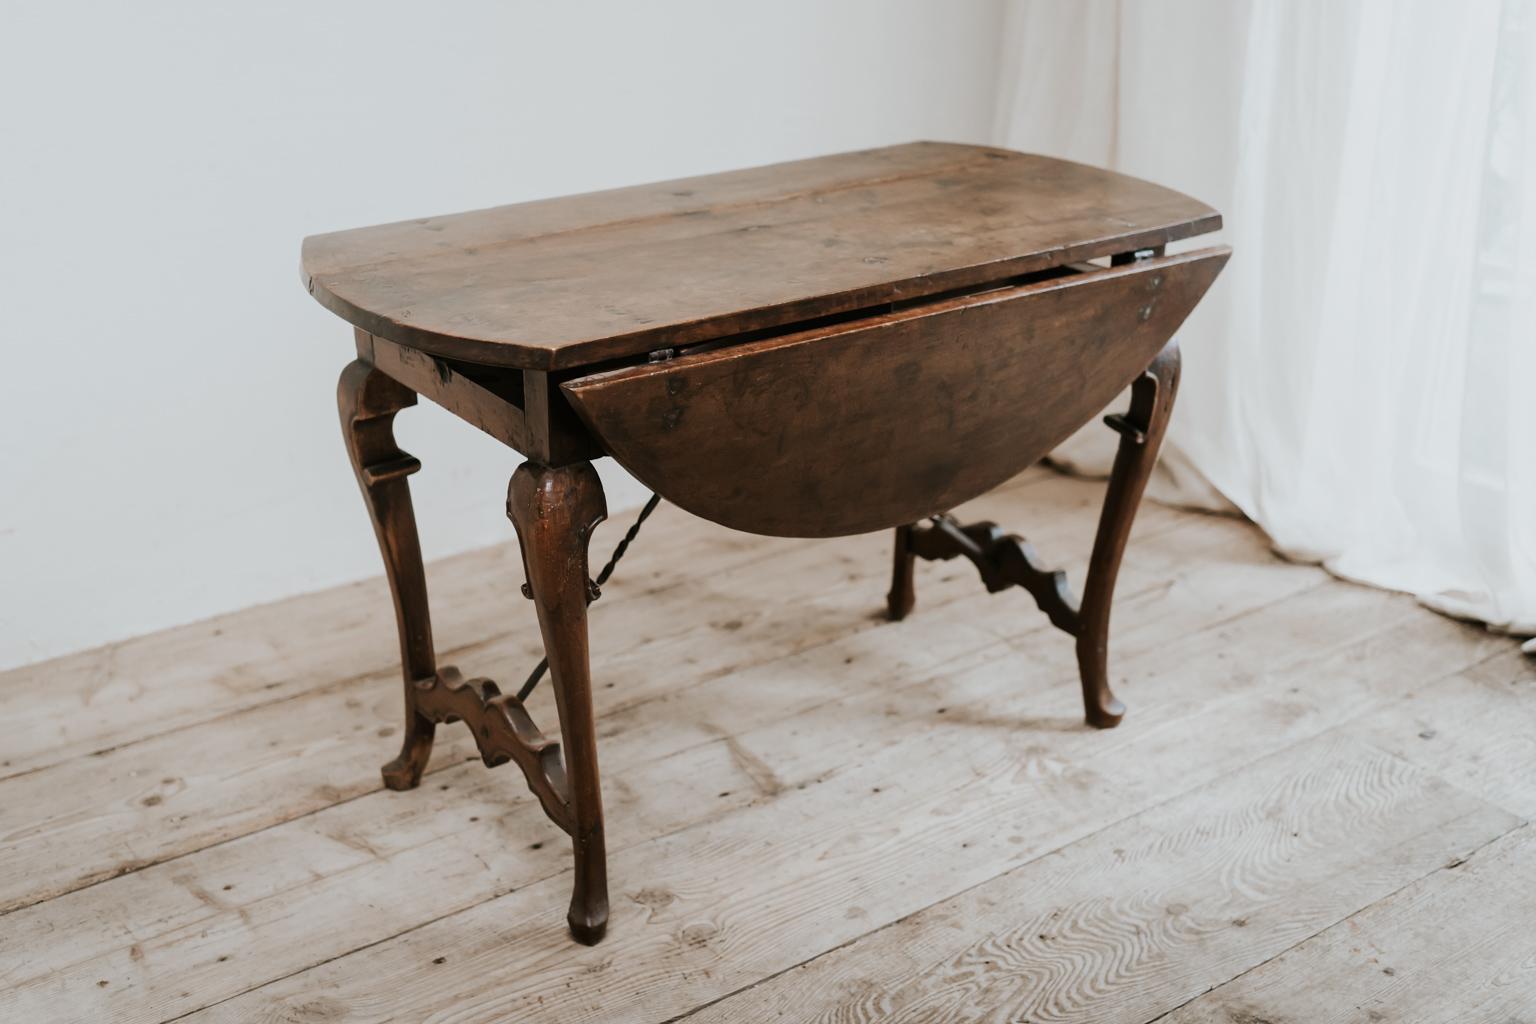 Just the best patina on this Spanish walnut drop-leaf table... ready to put in your interior ...